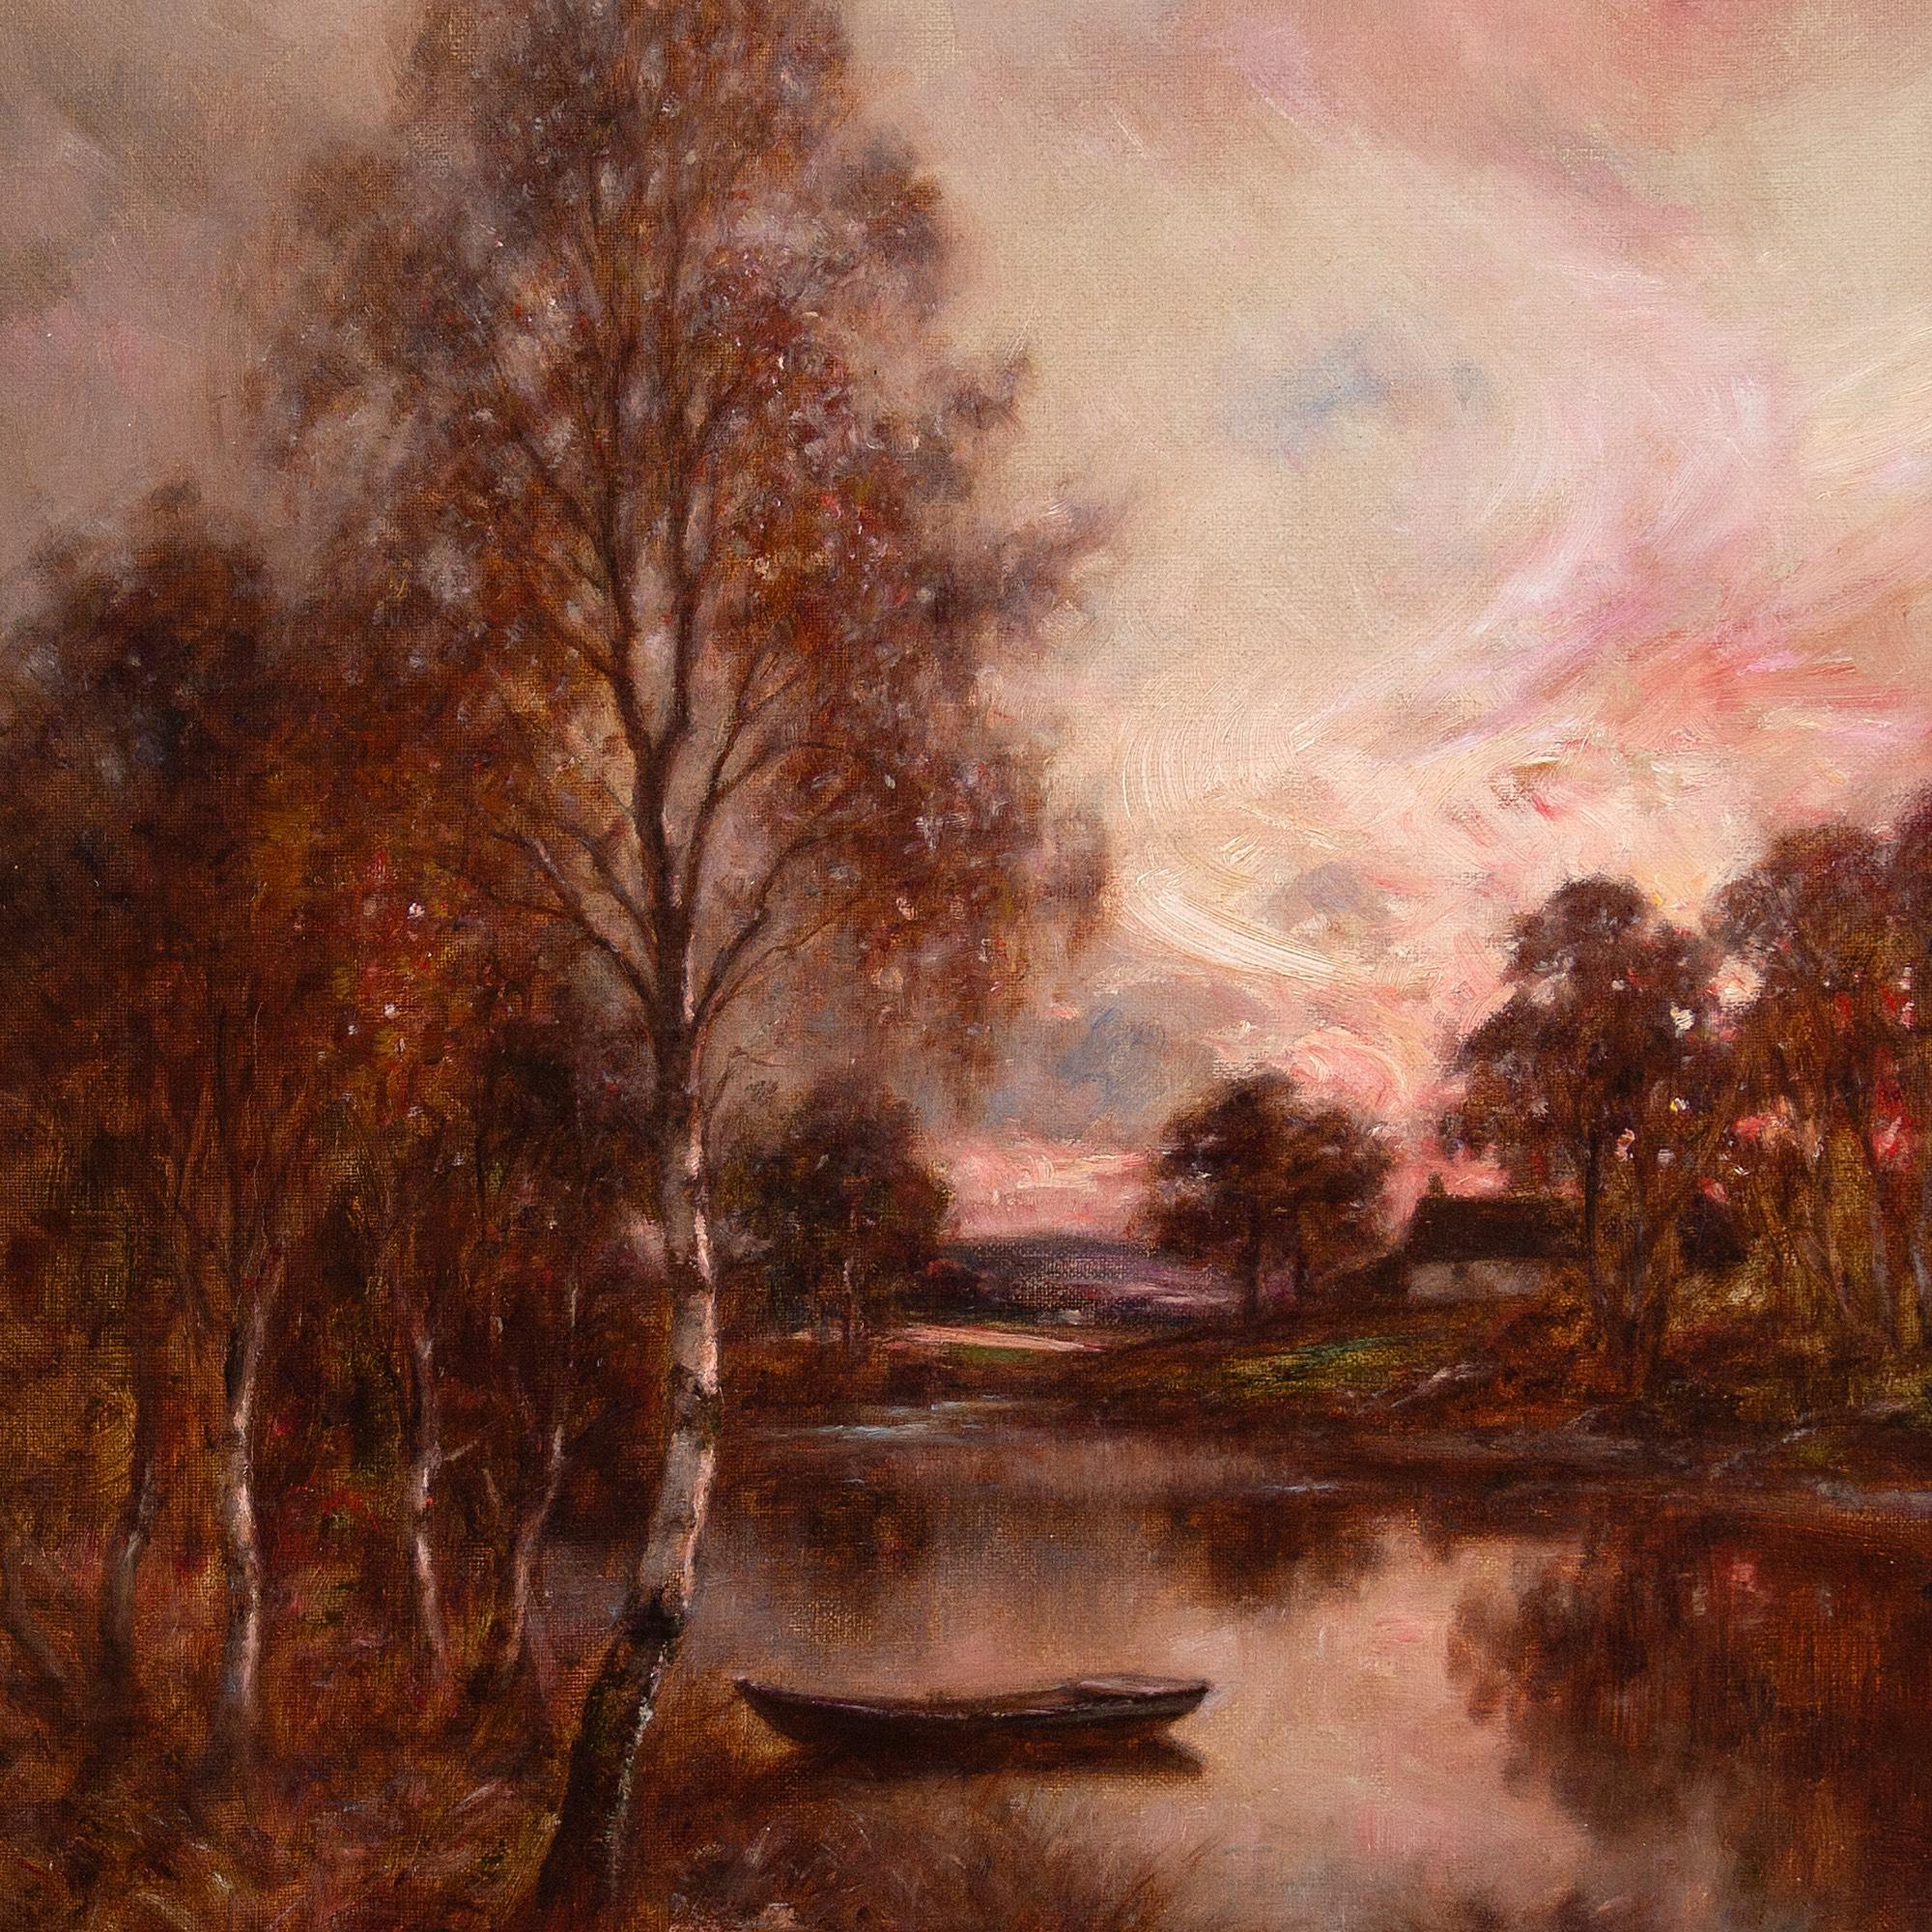 This early 20th-century oil painting by Scottish artist Allan Ramsay II (1852-1912) depicts a gentle river view near Glamis in Angus, Scotland. As the sun drifts beyond the horizon, passing clouds are illuminated by twists of tinted vermillion.